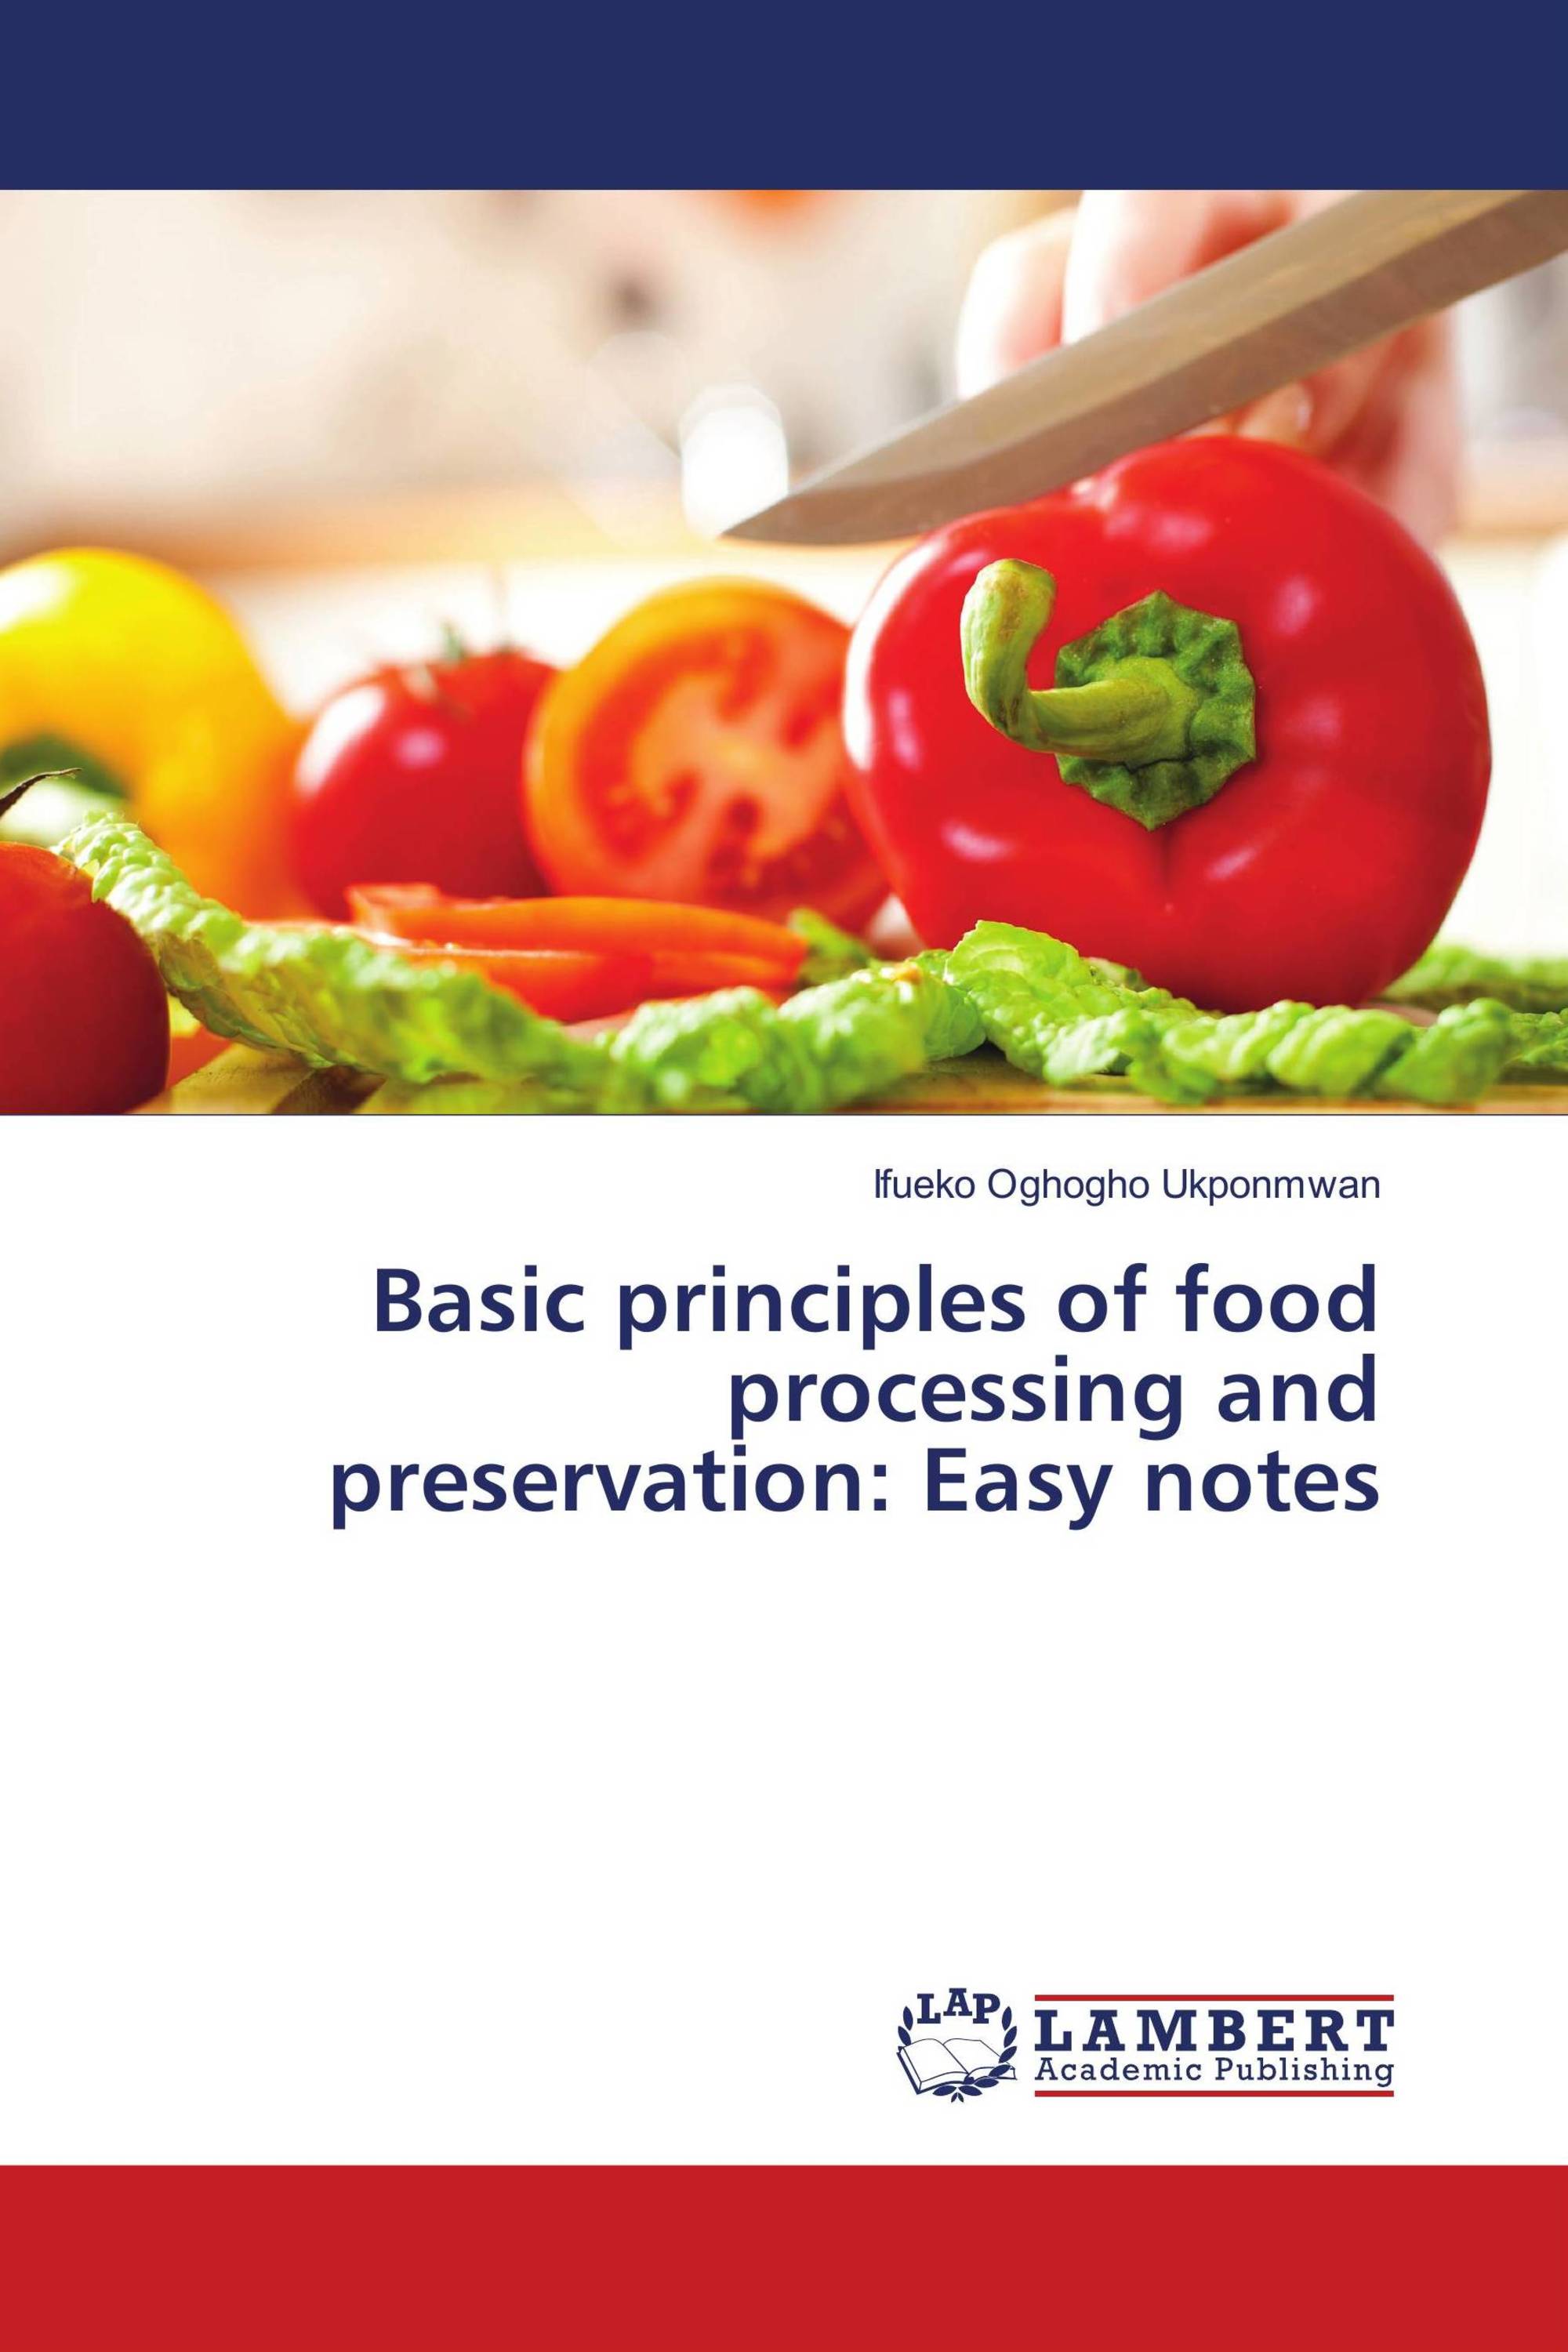 write a term paper on food processing and preservation